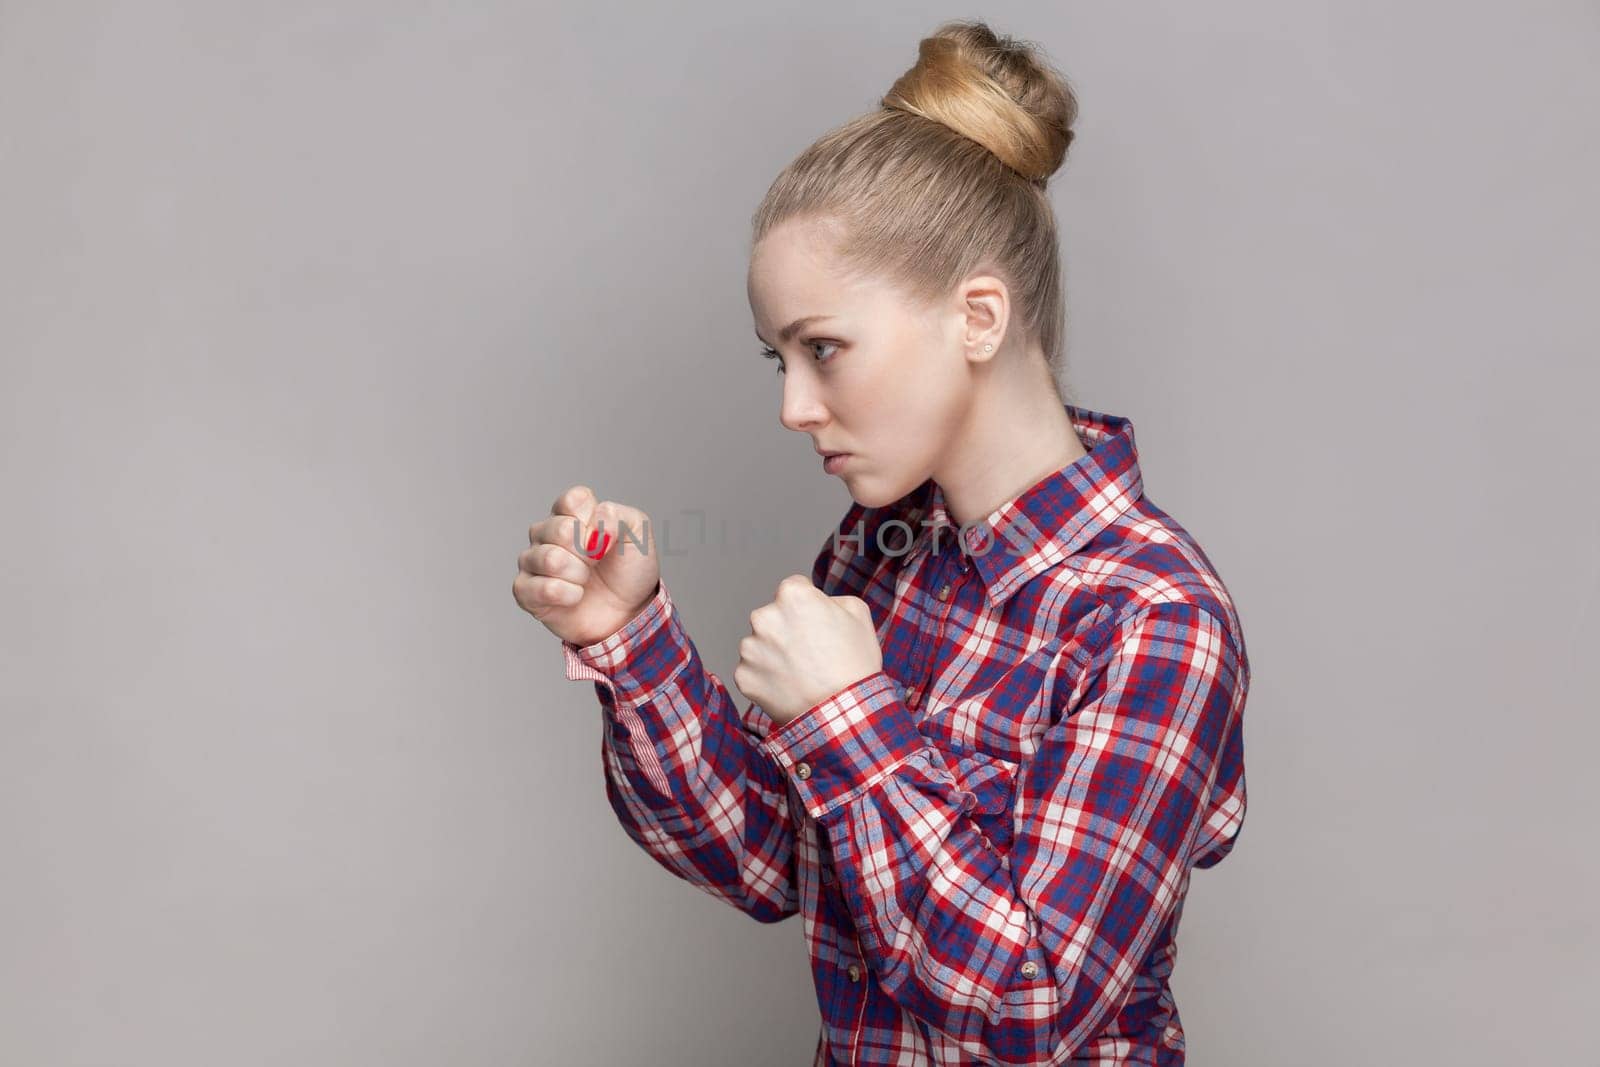 Side view portrait of angry woman with bun hairstyle standing with clenched fists, being ready to attack somebody, wearing checkered shirt. Indoor studio shot isolated on gray background.